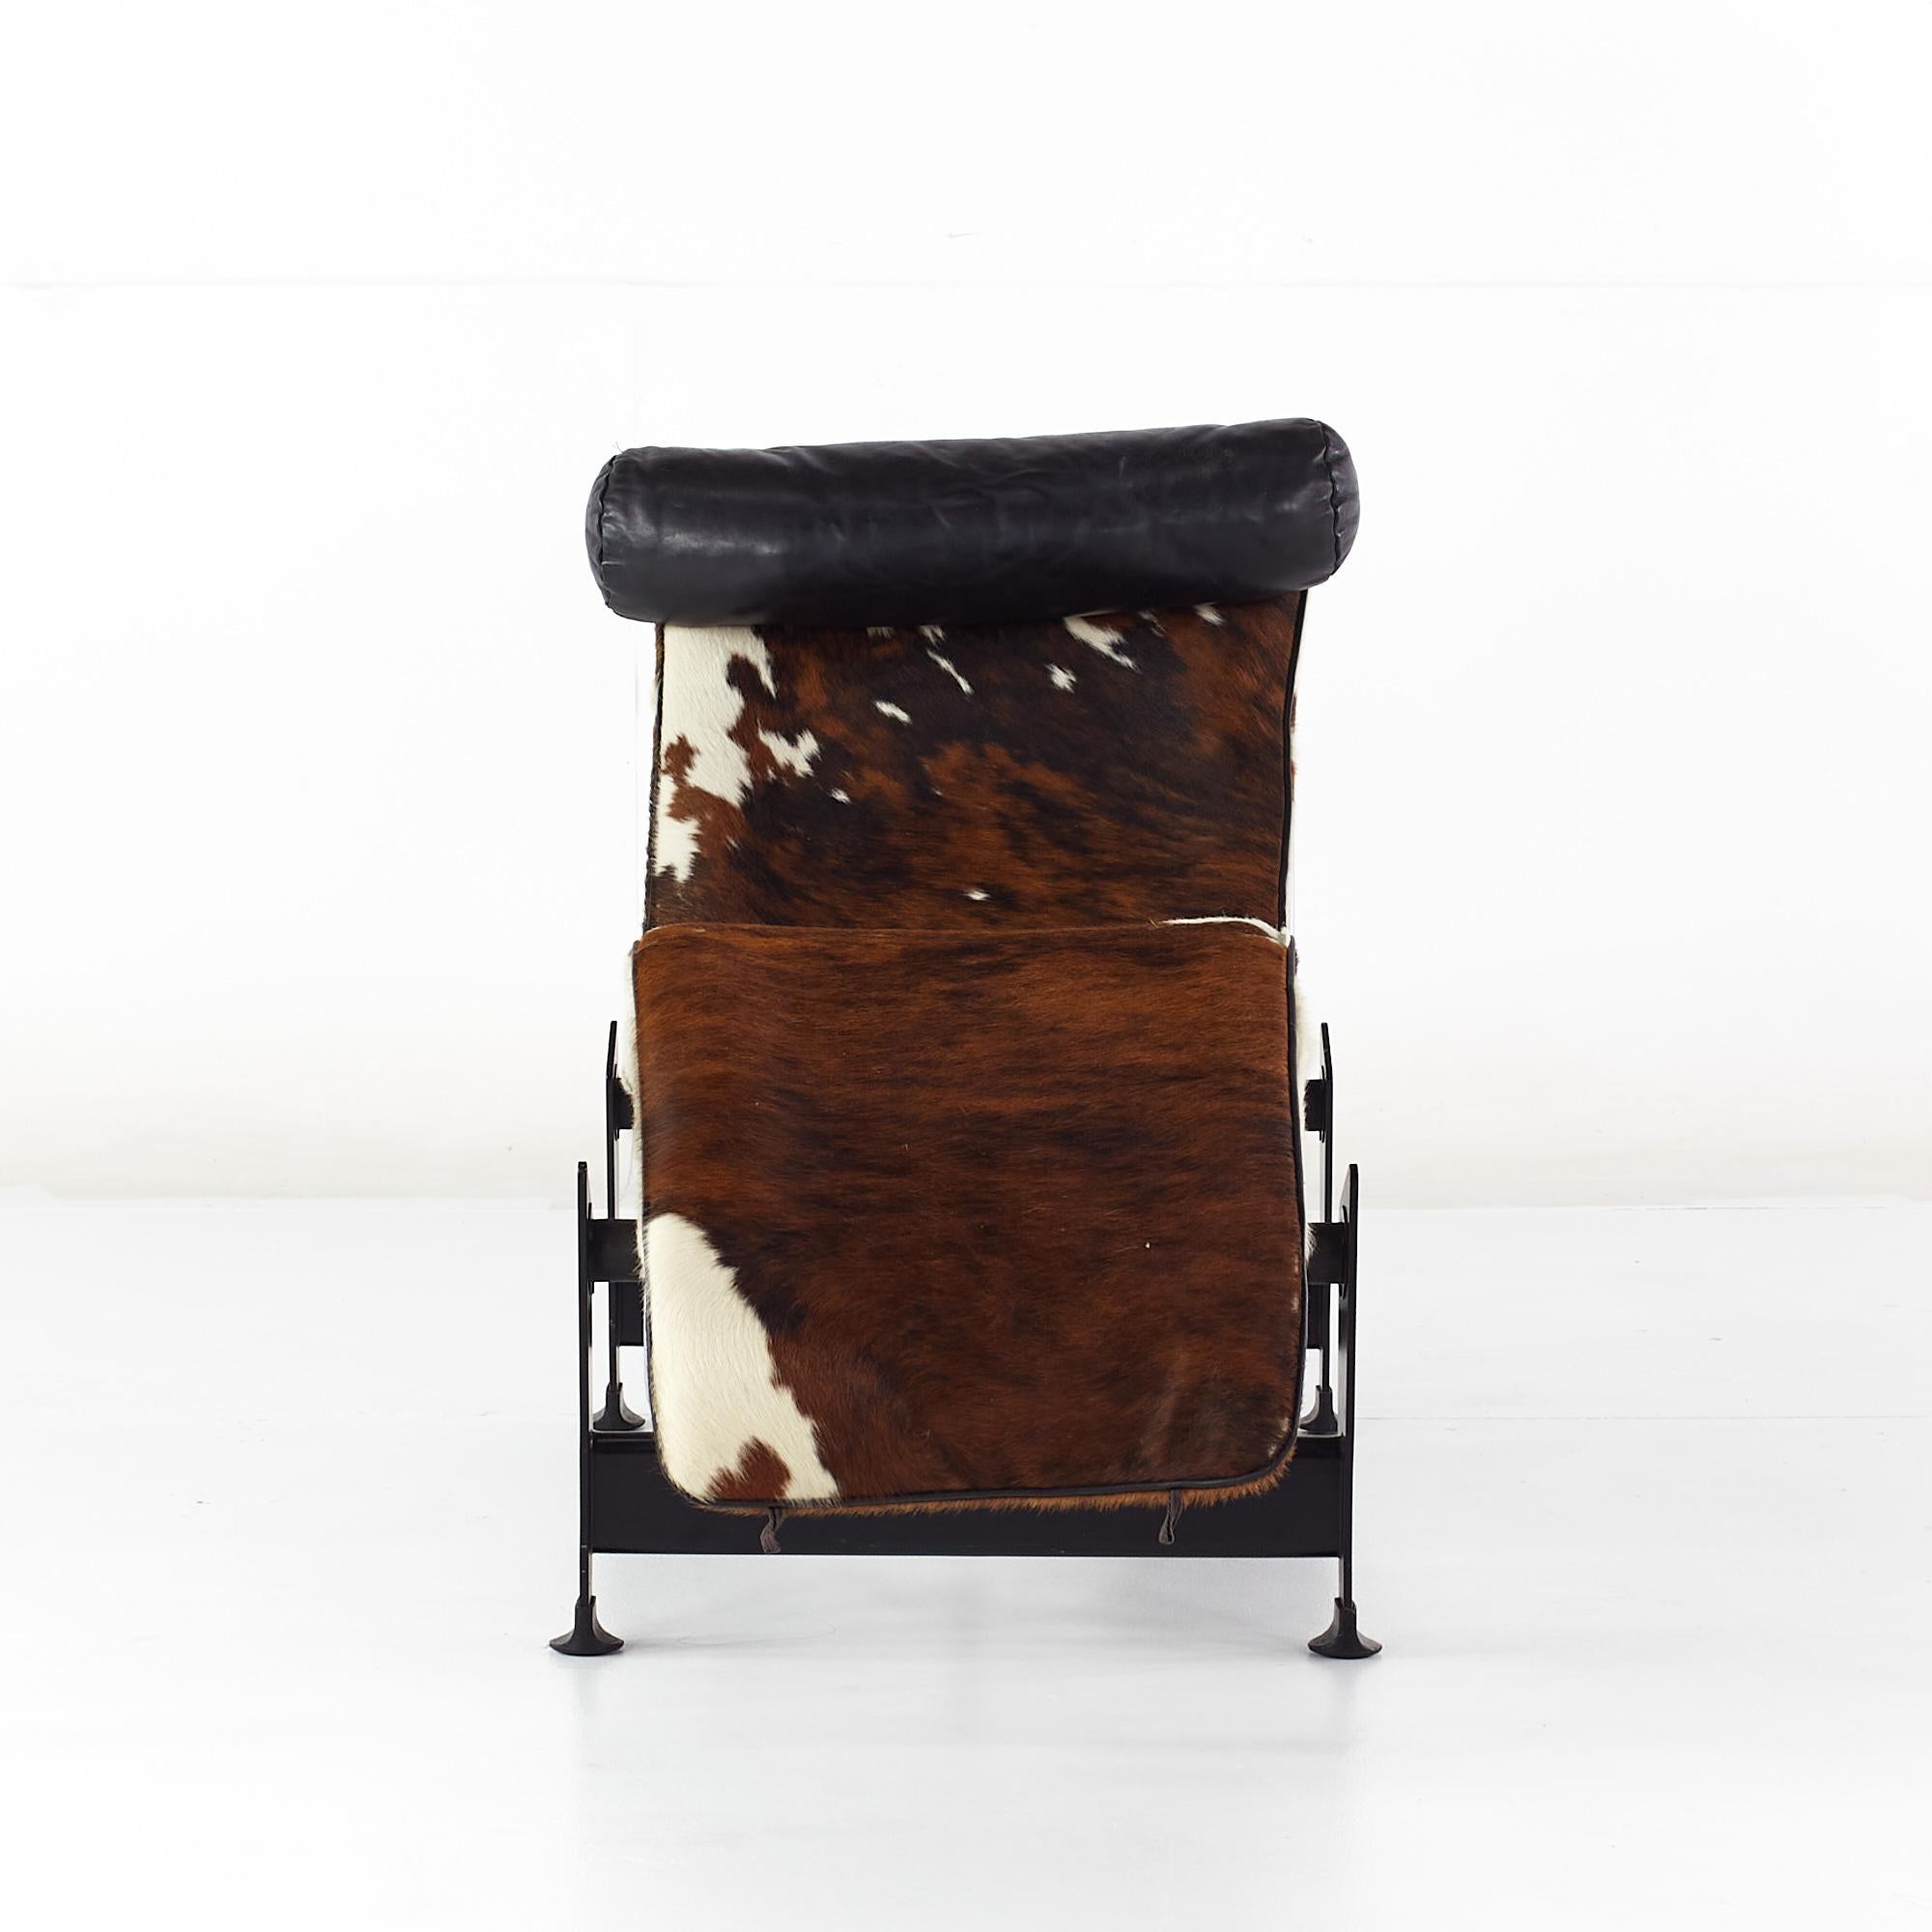 Le Corbusier midcentury LC4 Cowhide Chaise lounge chair

This chair measures: 24 wide x 64 deep x 27 high, with a seat height of 12 inches

All pieces of furniture can be had in what we call restored vintage condition. That means the piece is